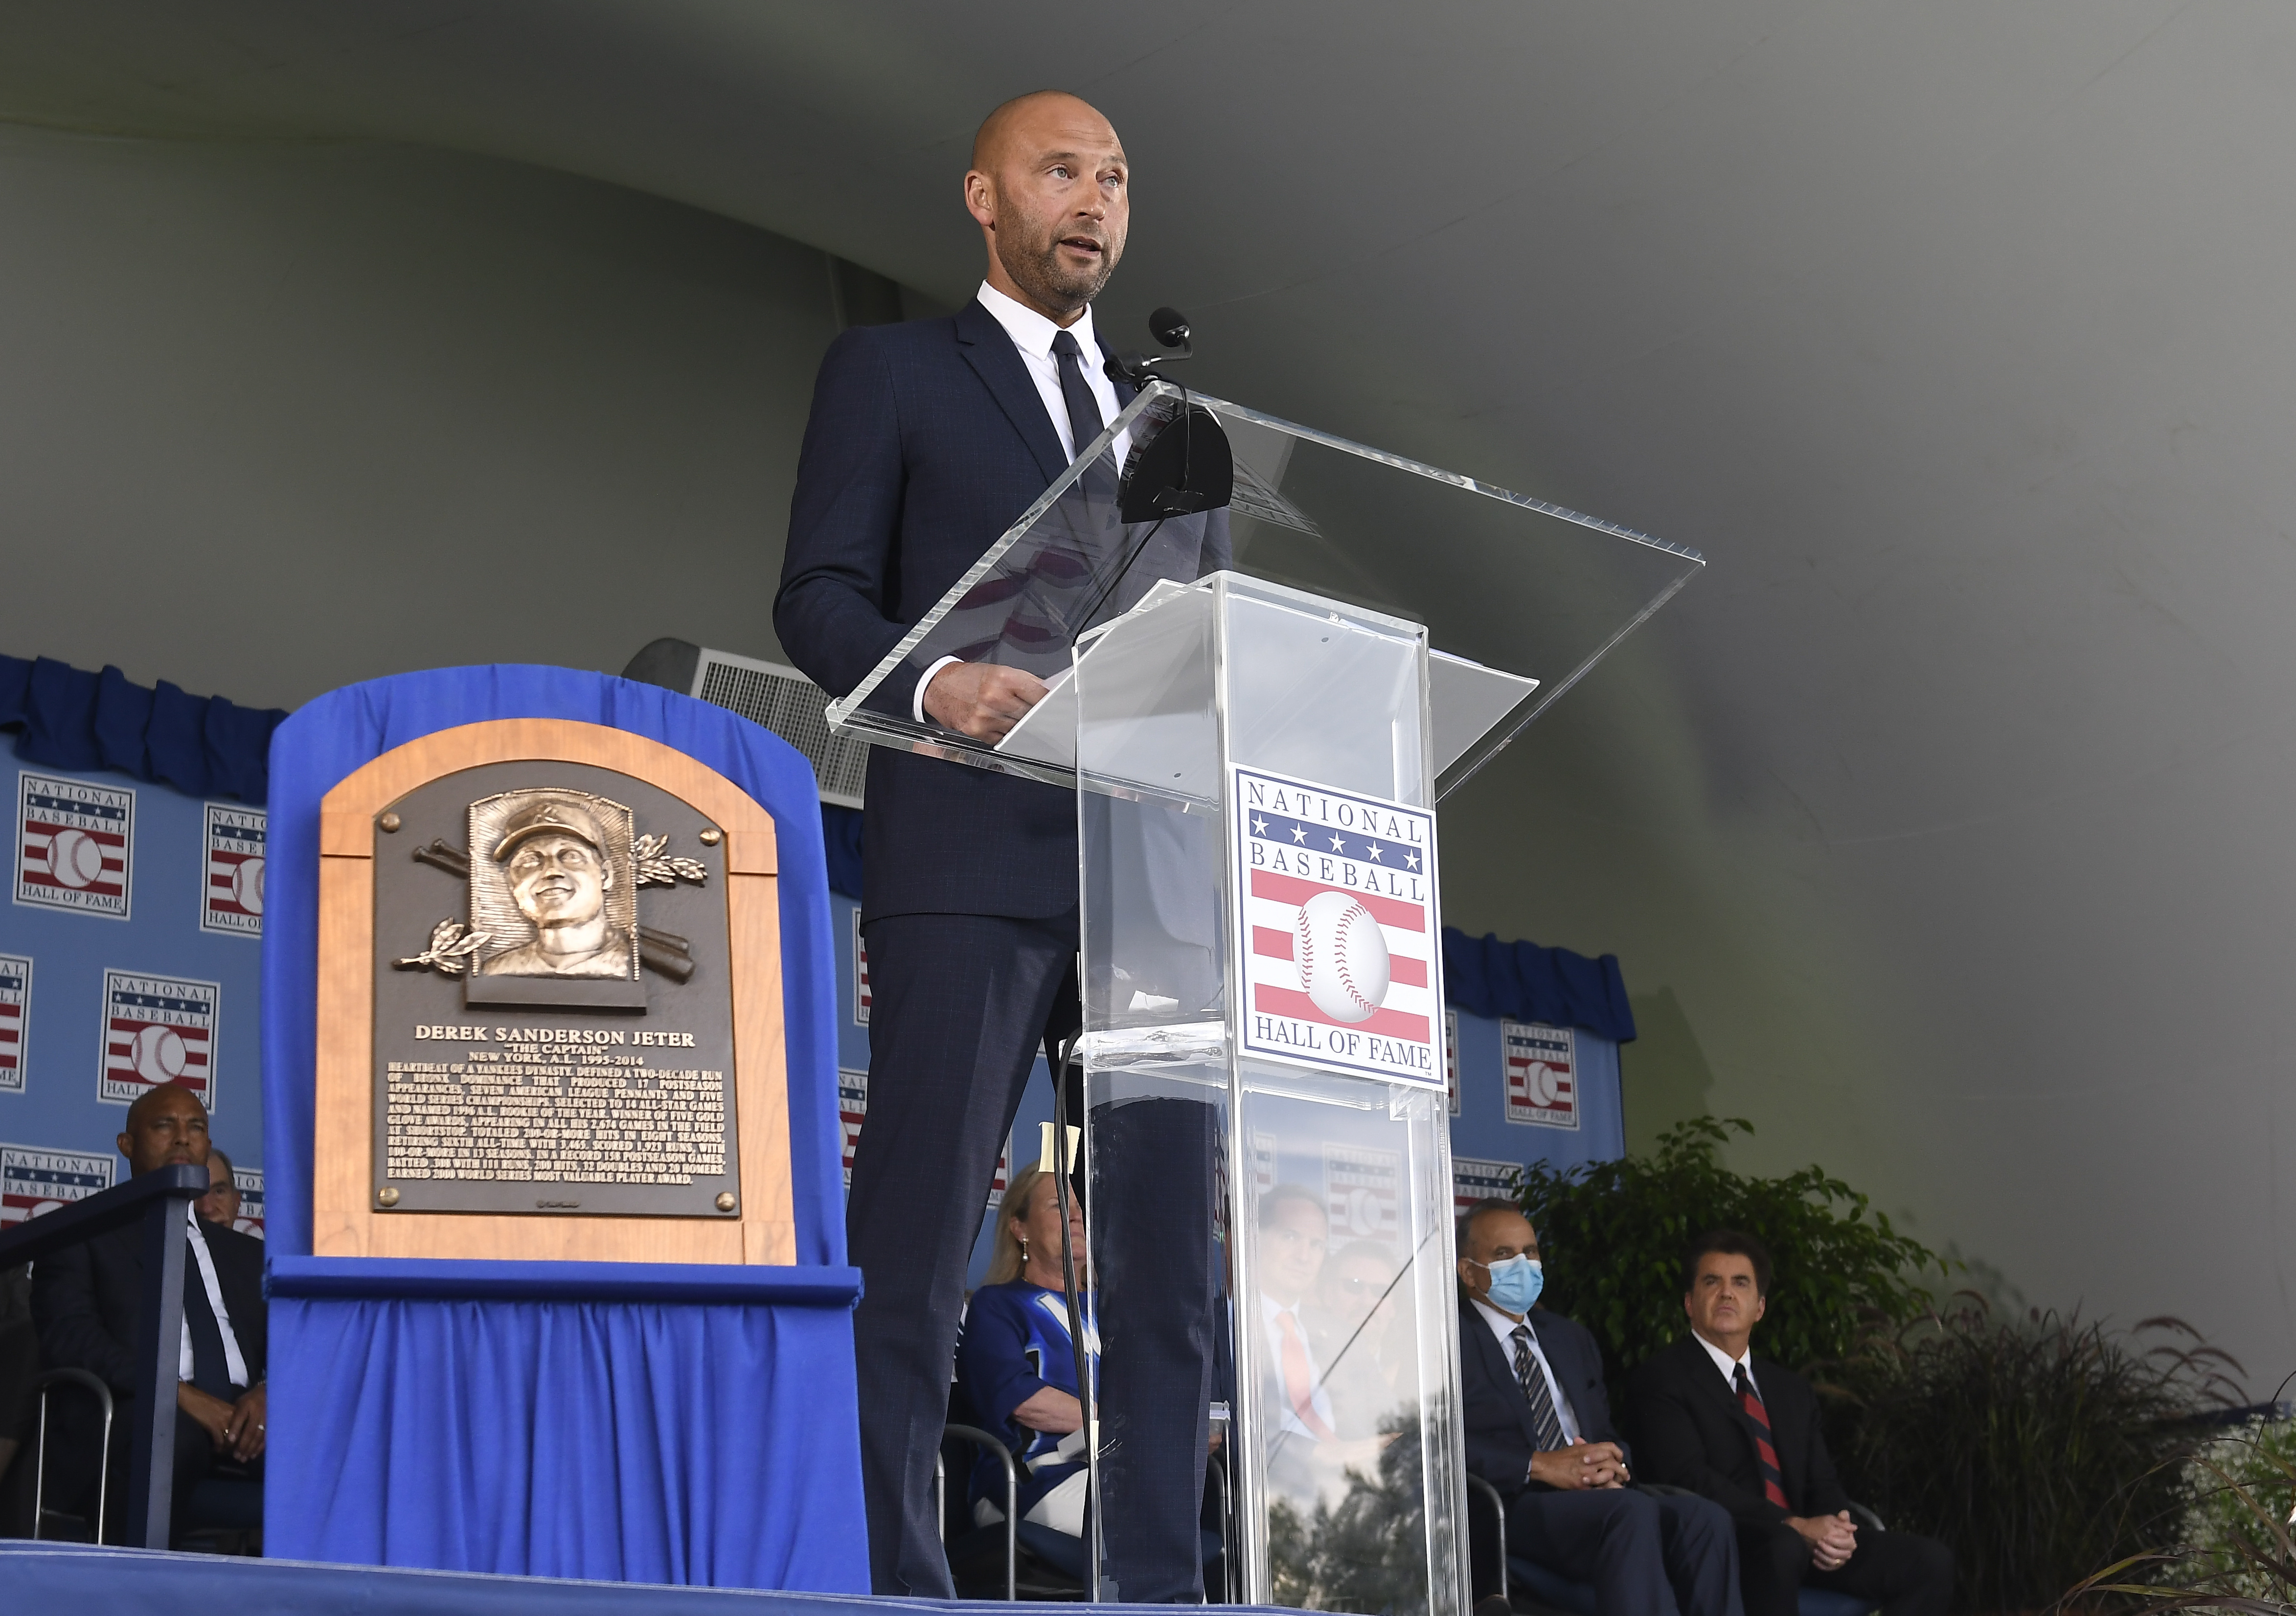 Sullivan: The Derek Jeter Hall of Fame induction was a two-decade deal